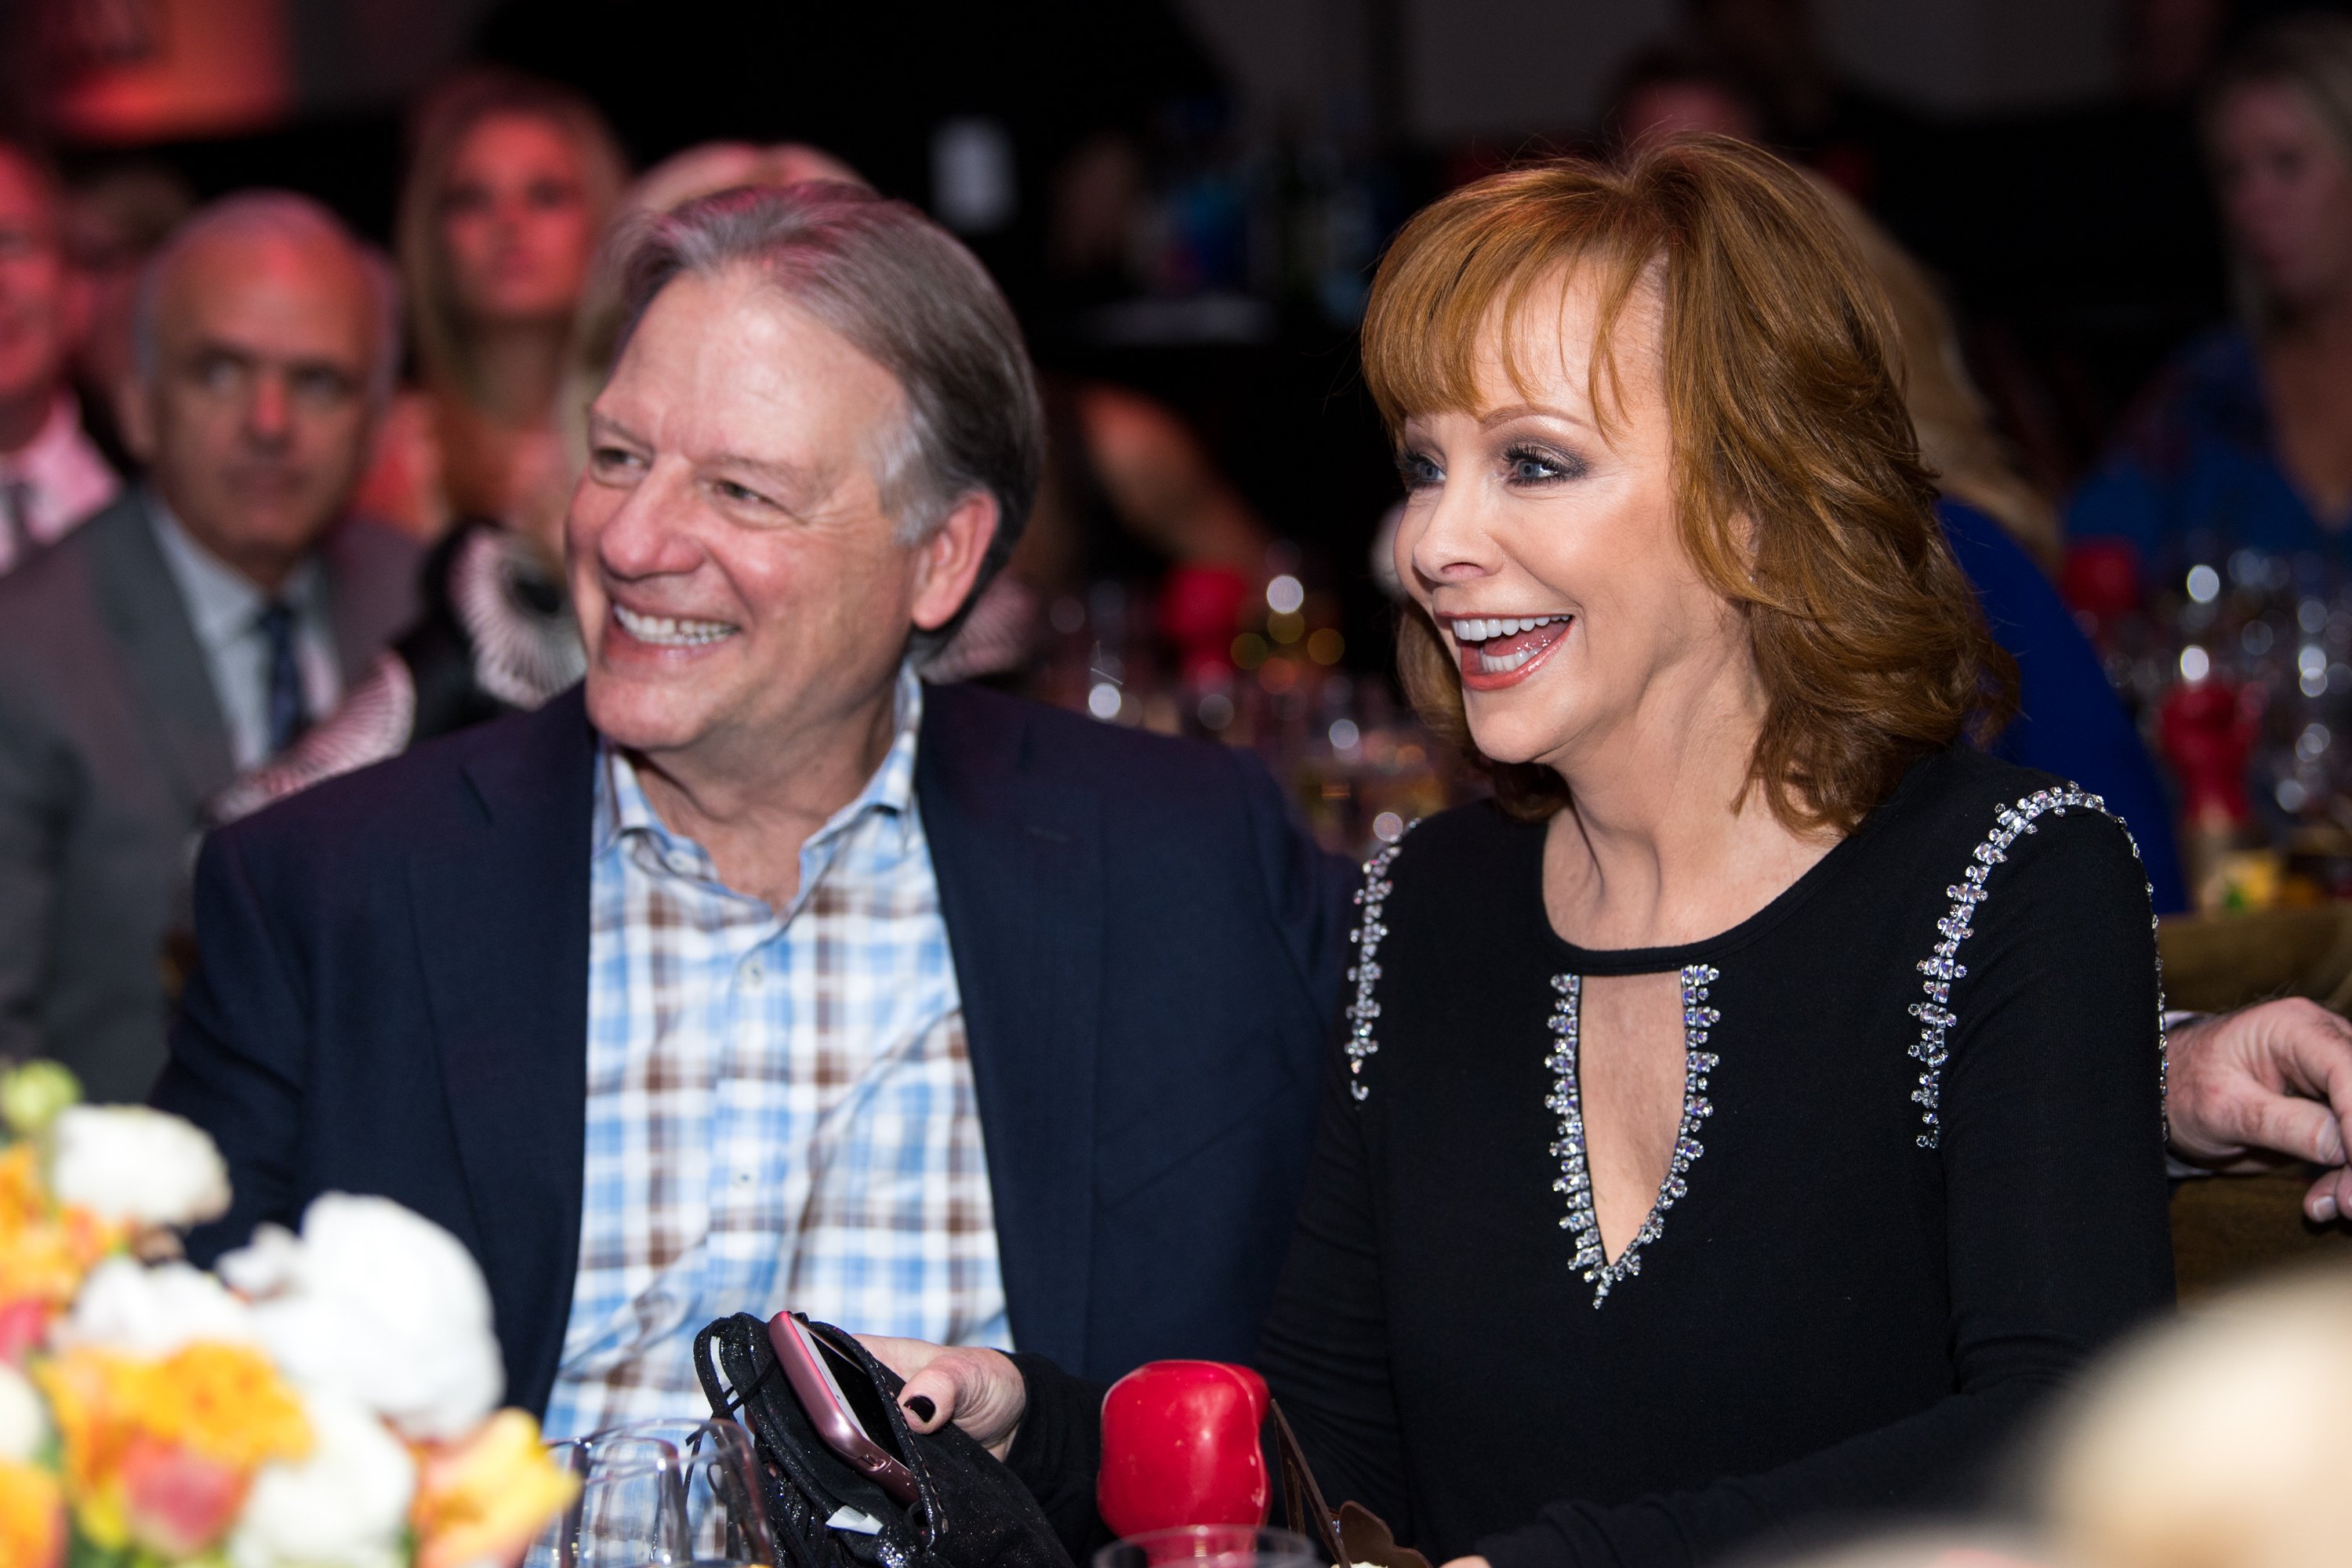 Anthony Lasuzzo (L) and Reba McEntire attend the Celebrity Fight Night's Founders Club Dinner on March 9, 2018, in Phoenix, Arizona. | Source: Getty Images.